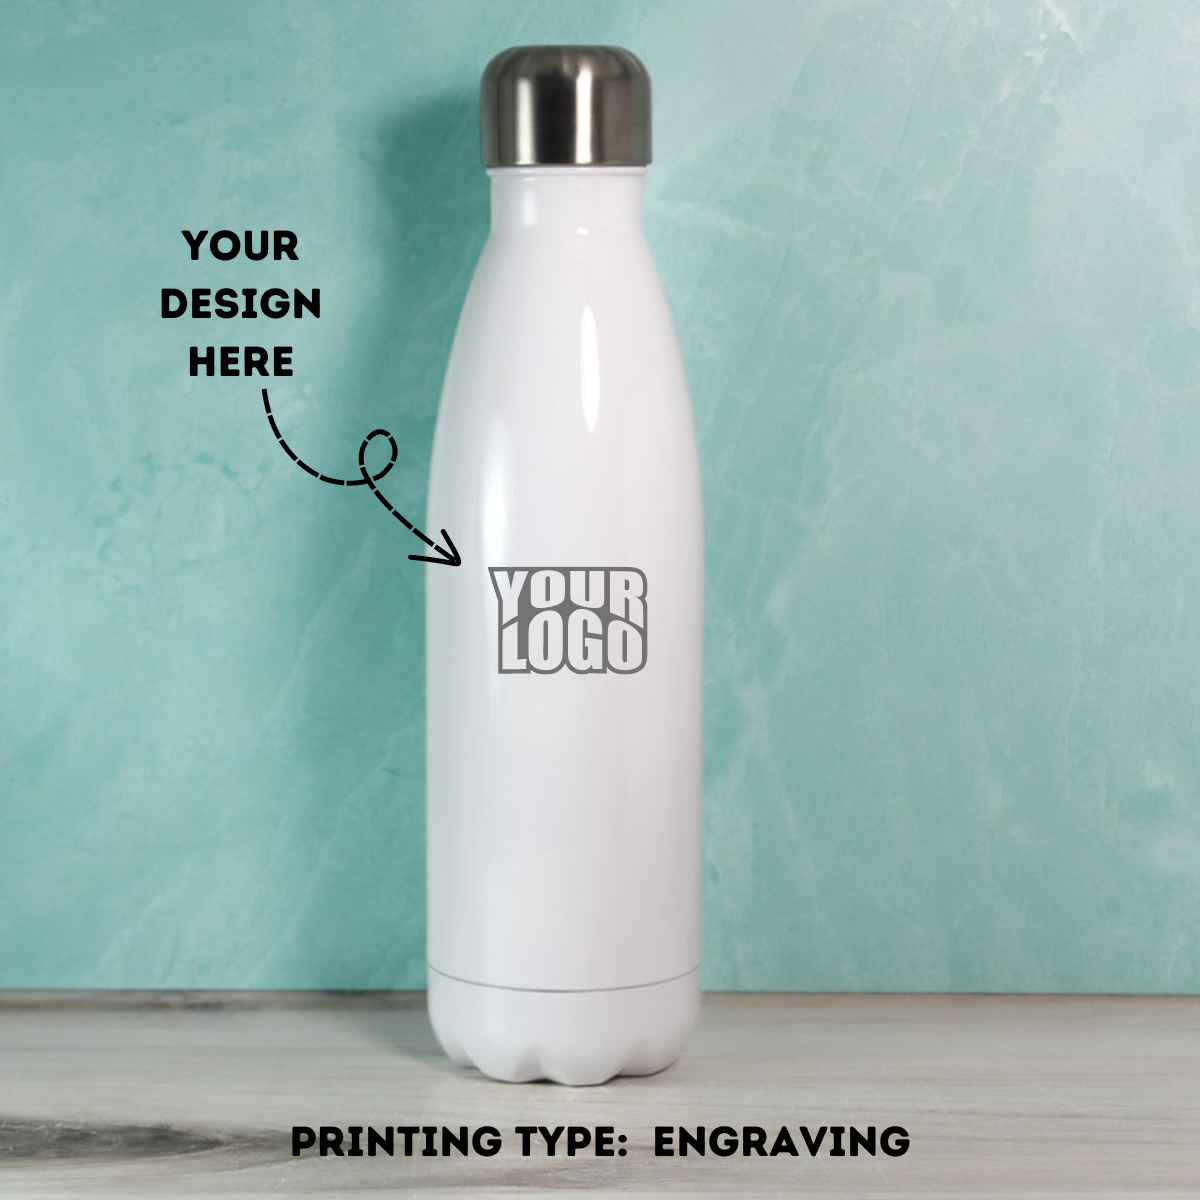 White Insulated Steel Cola Shape Water Bottle Laser Engraved - 500ml - For Return Gift, Corporate Gifting, Office or Personal Use